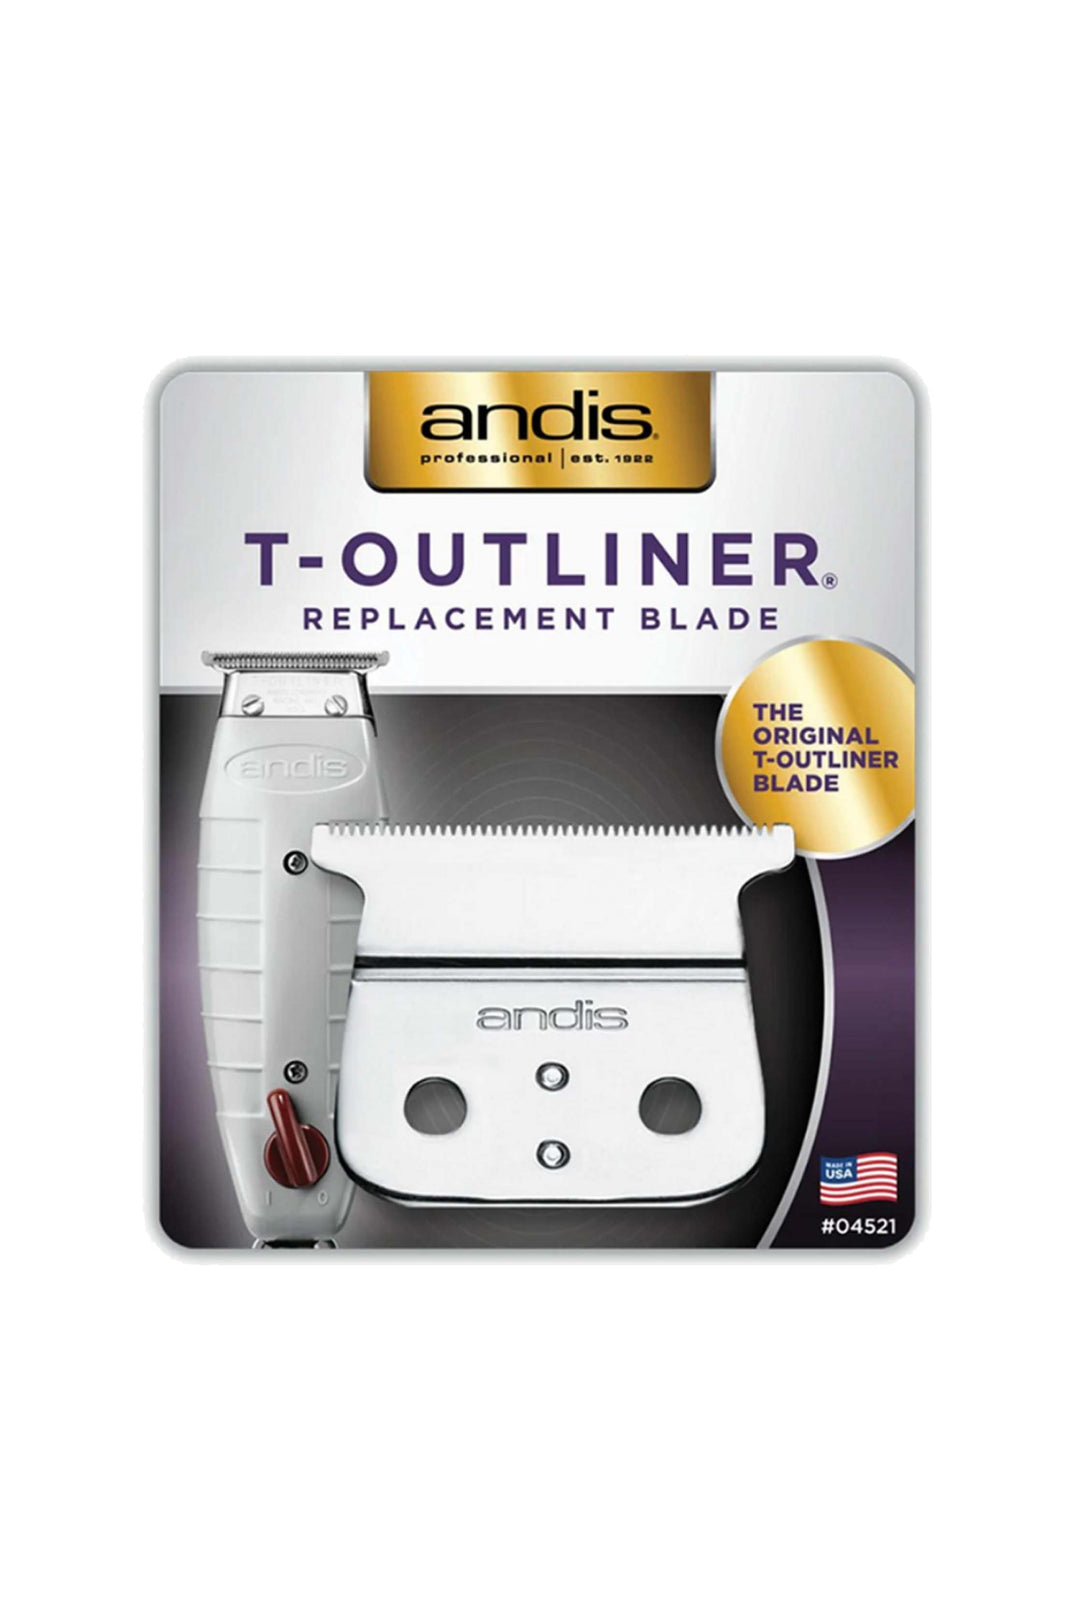 ANDIS T-OUTLINER REPLACEMENT BLADE